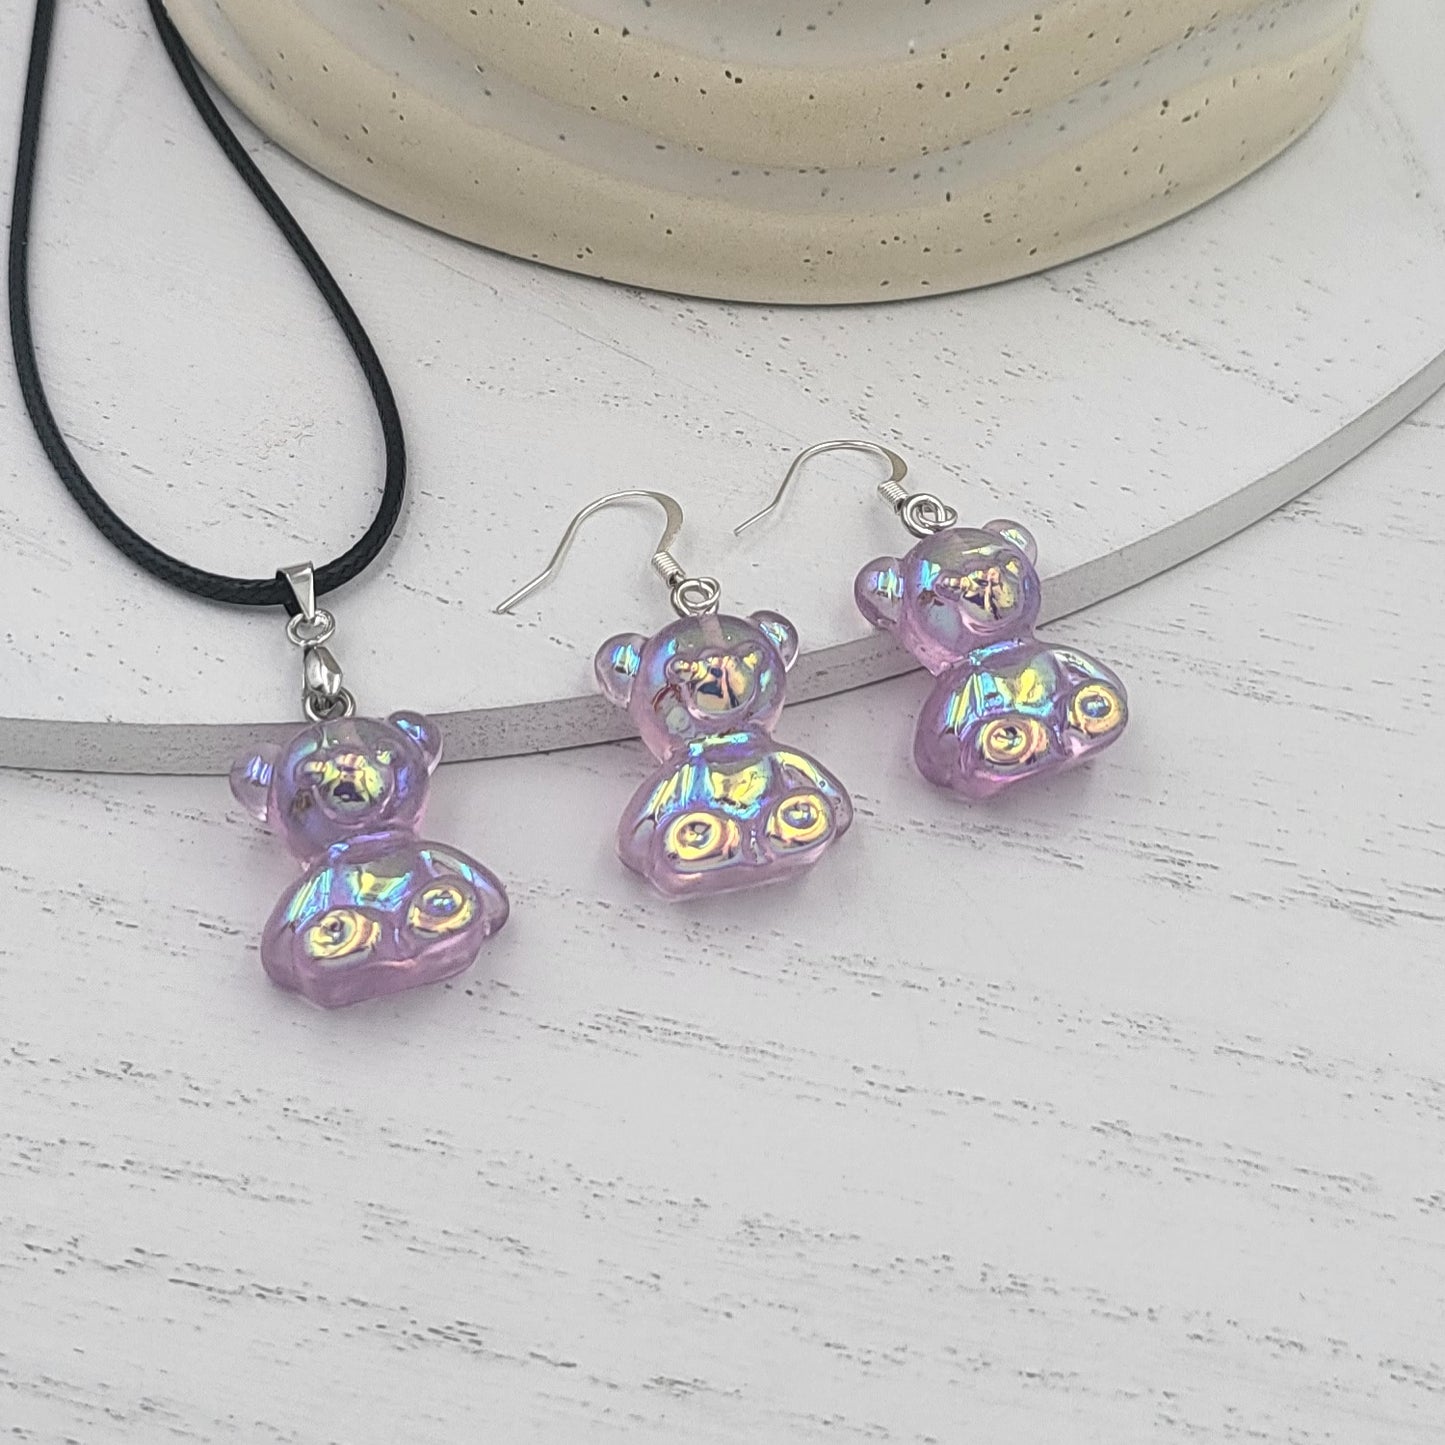 BESHEEK Silvertone and Purple Resin Gummy Bear Jewelry Set | Hypoallergenic Boho Kitchsy Artistic Funky Cute Style Fashion Necklace and Earrings